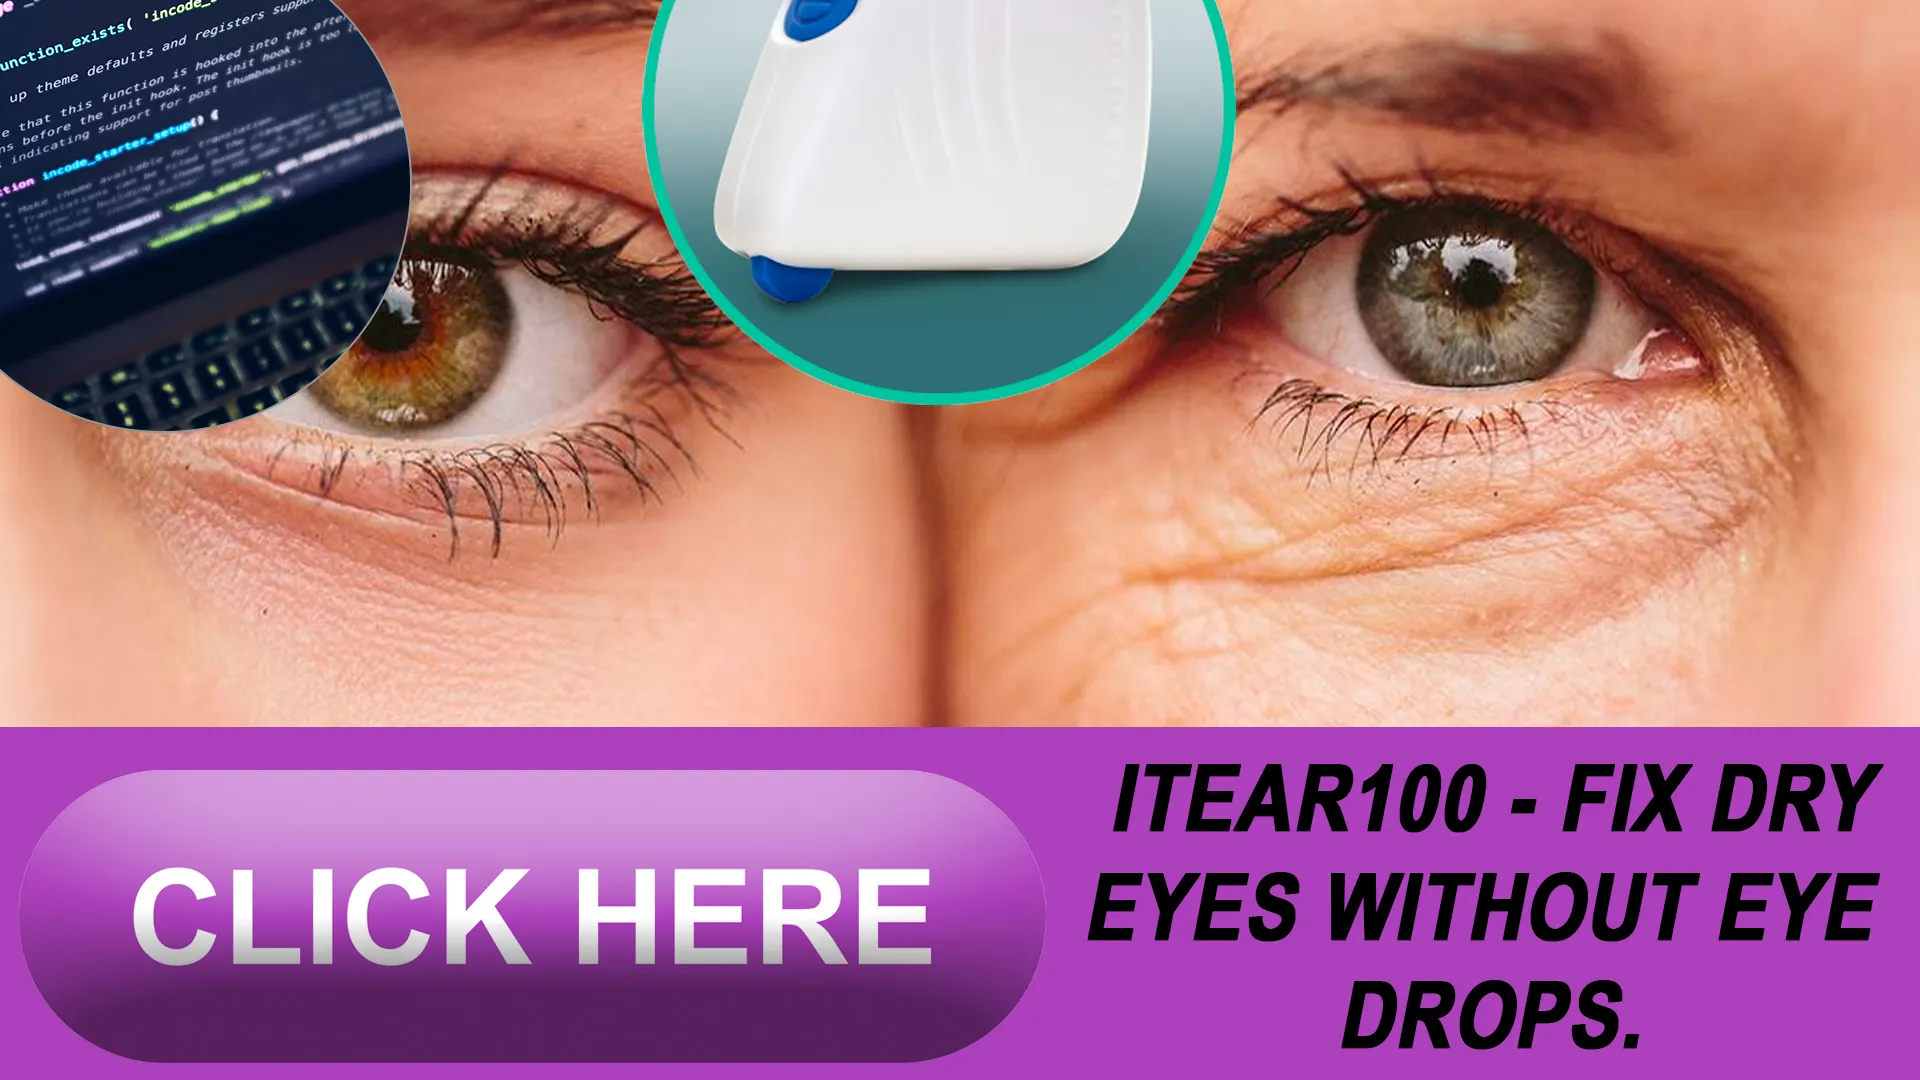 The iTEAR100 Device: A Drug-Free, Drop-Free Solution